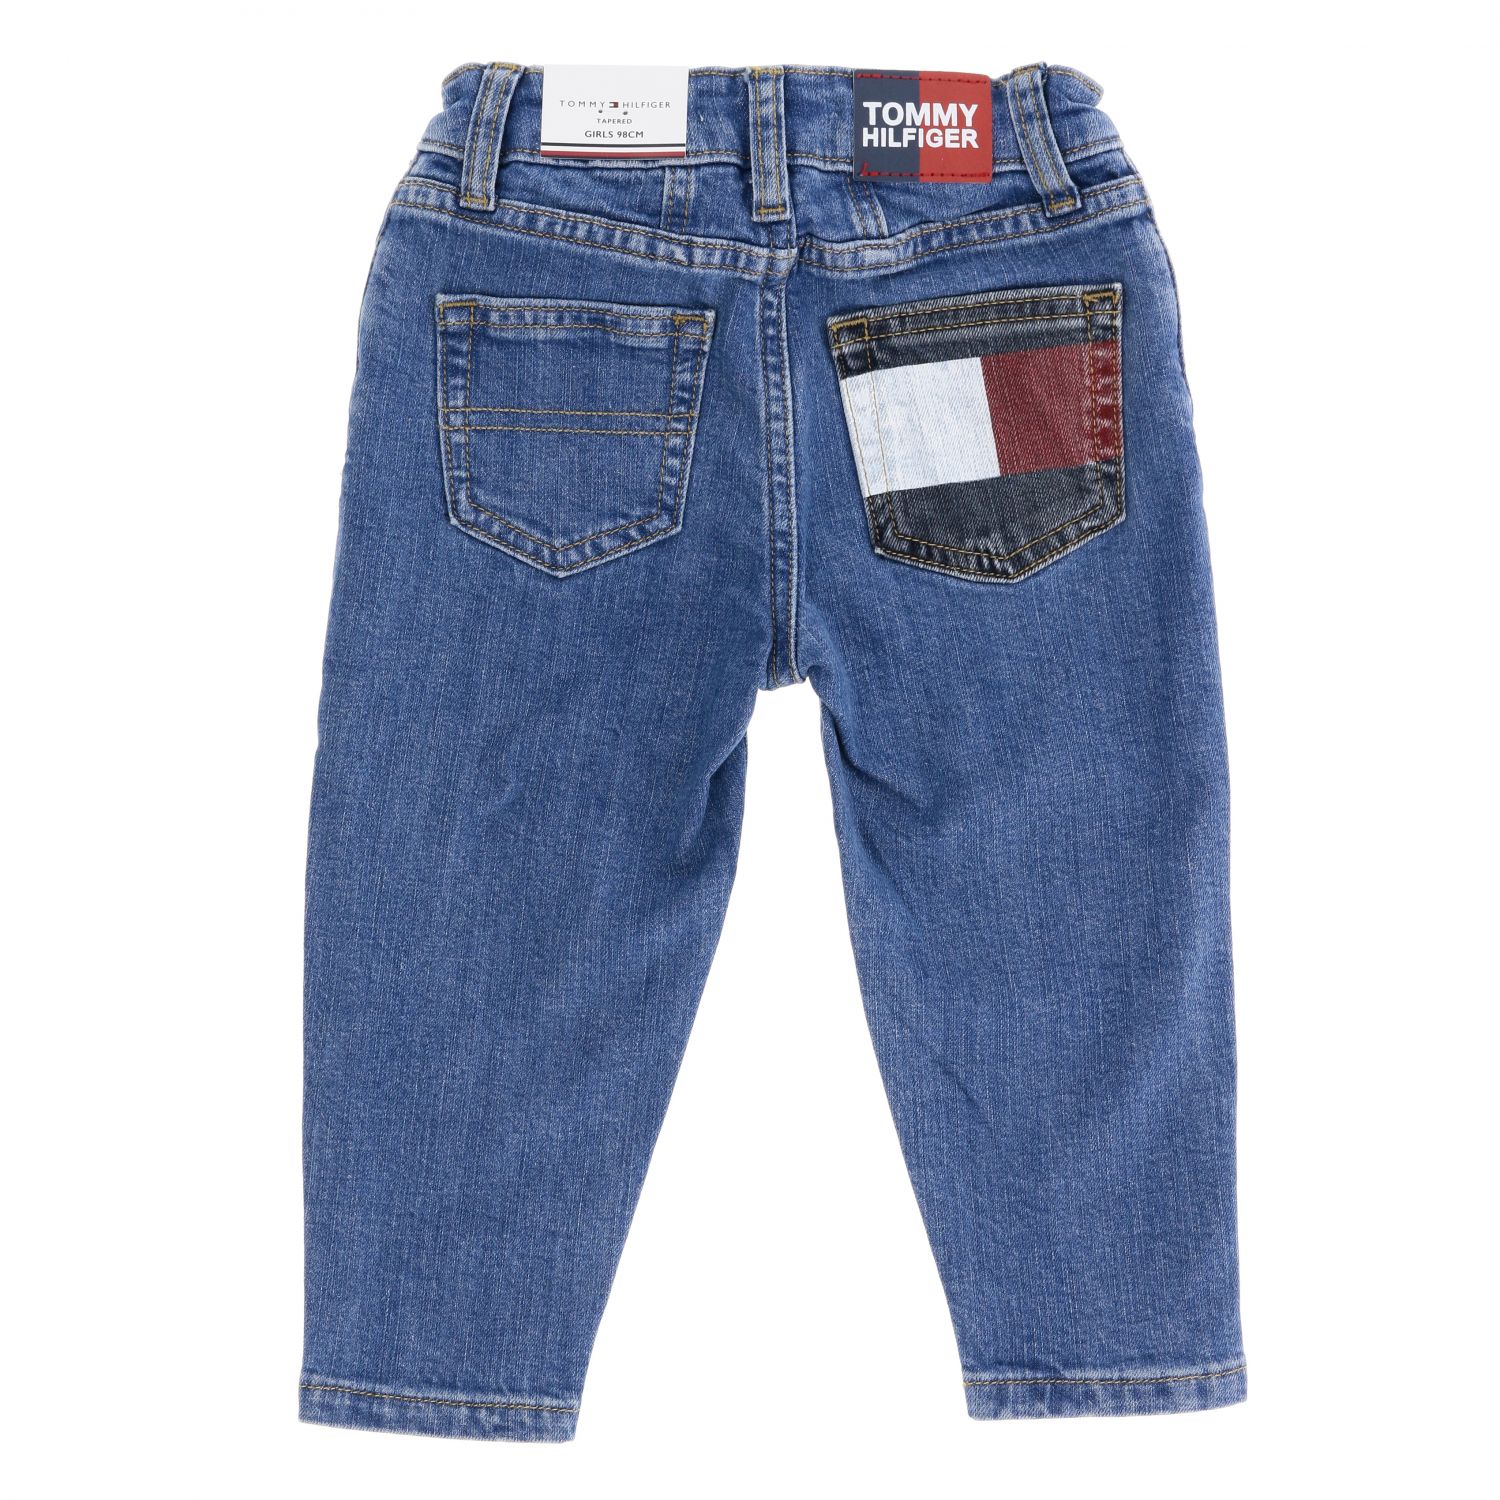 Tommy Hilfiger Outlet: jeans in used denim with printed - Denim | Tommy Hilfiger jeans online on GIGLIO.COM